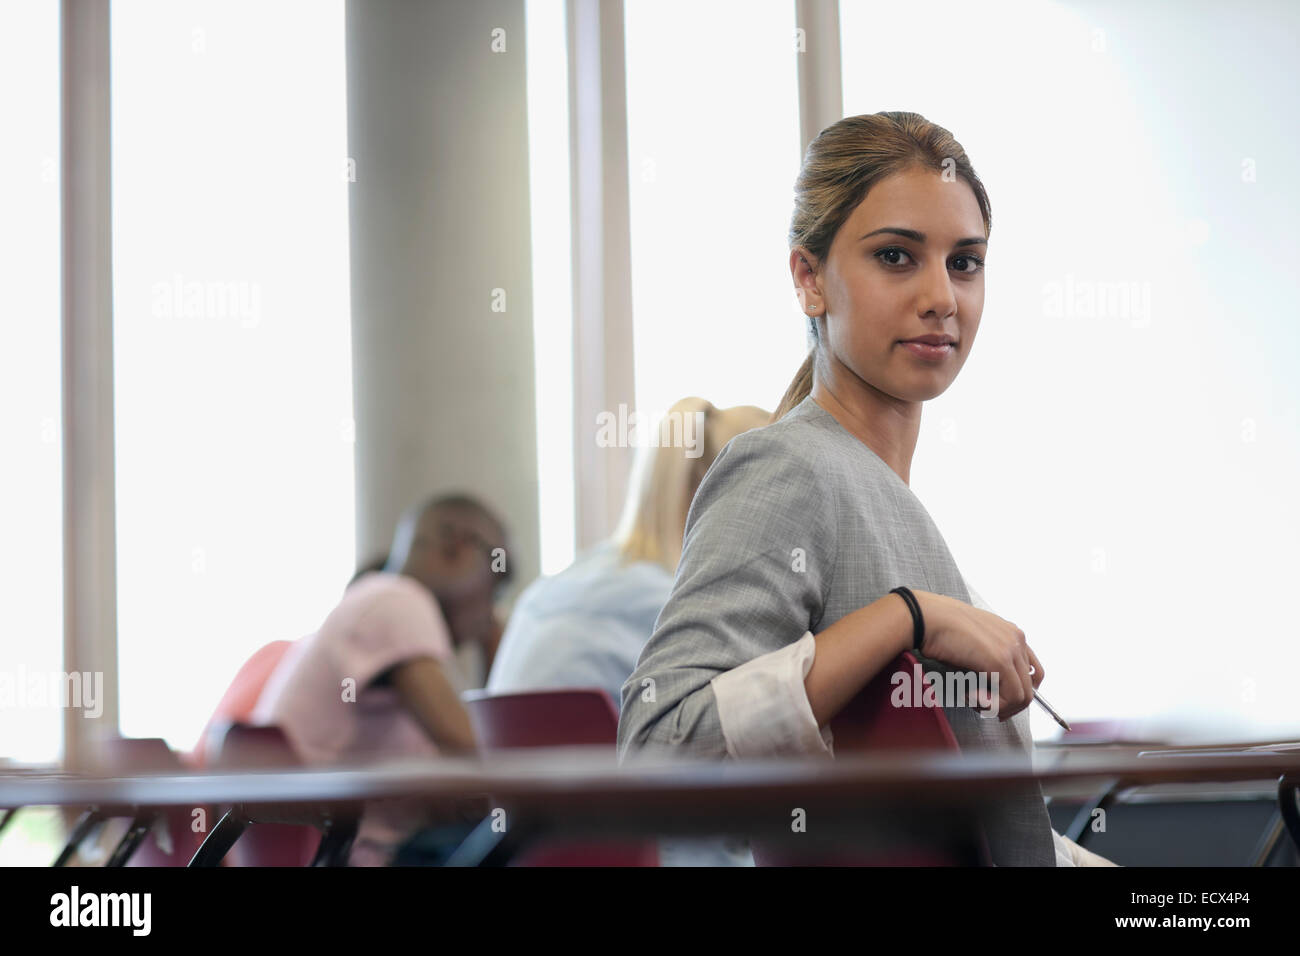 Female student looking at camera and sitting at desk during lecture Stock Photo